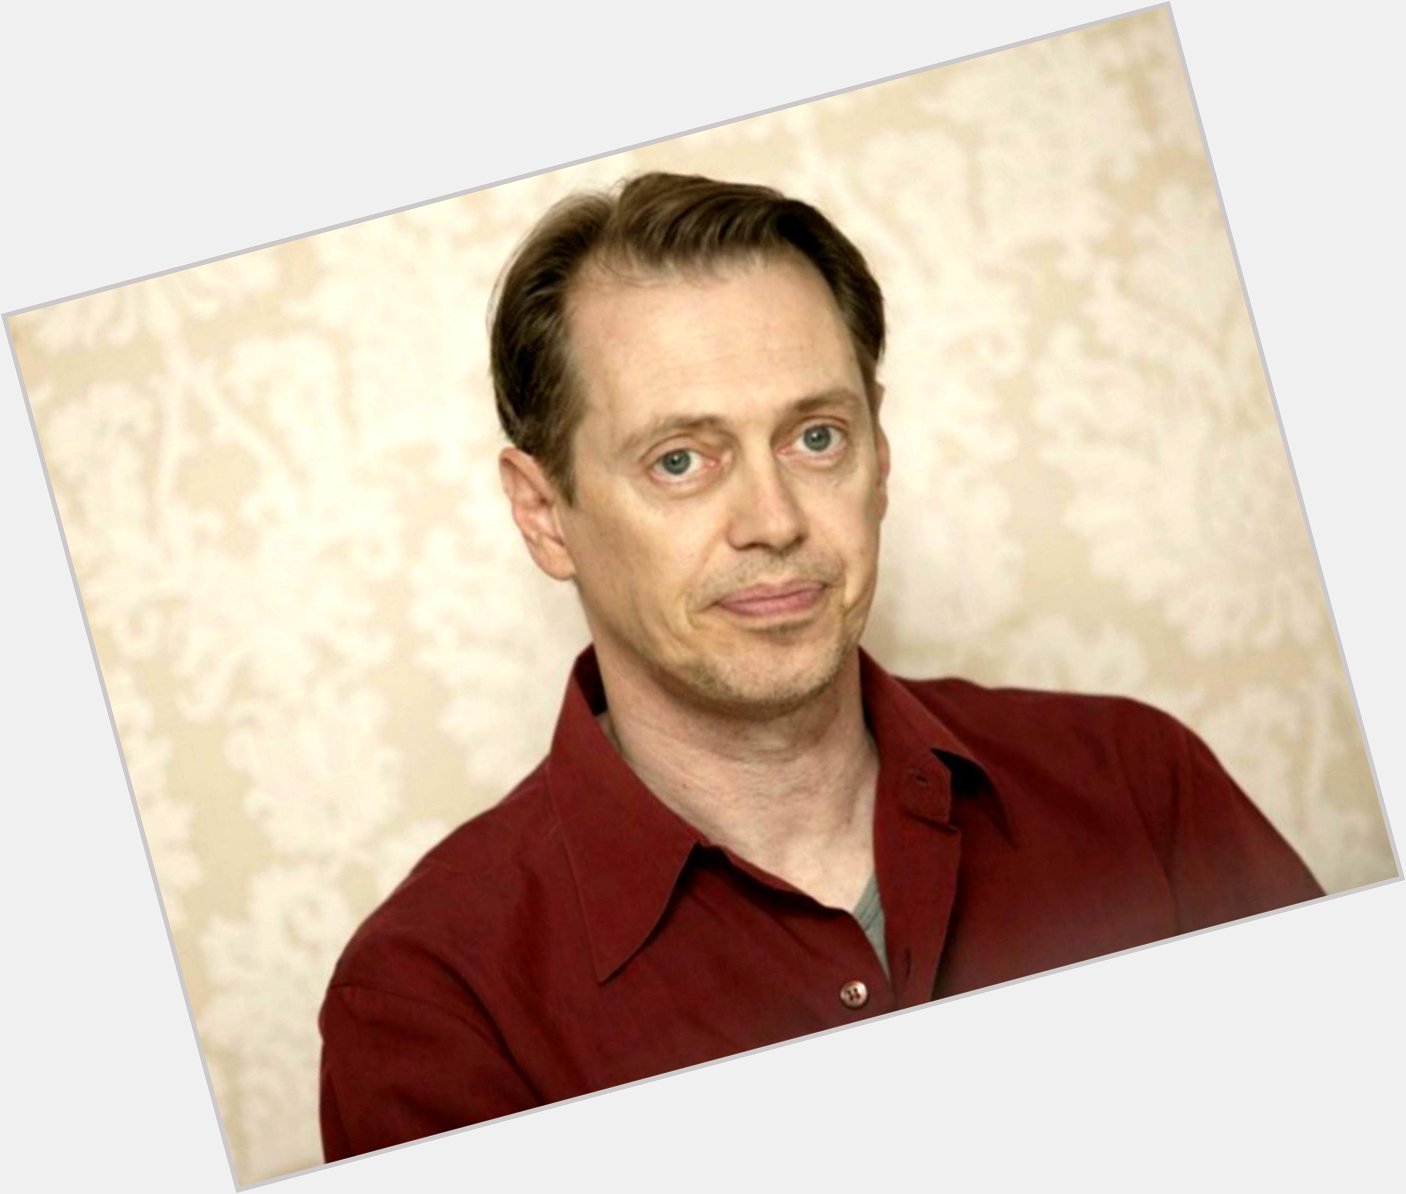 Happy Birthday to Steve Buscemi, who turns 57 today! 